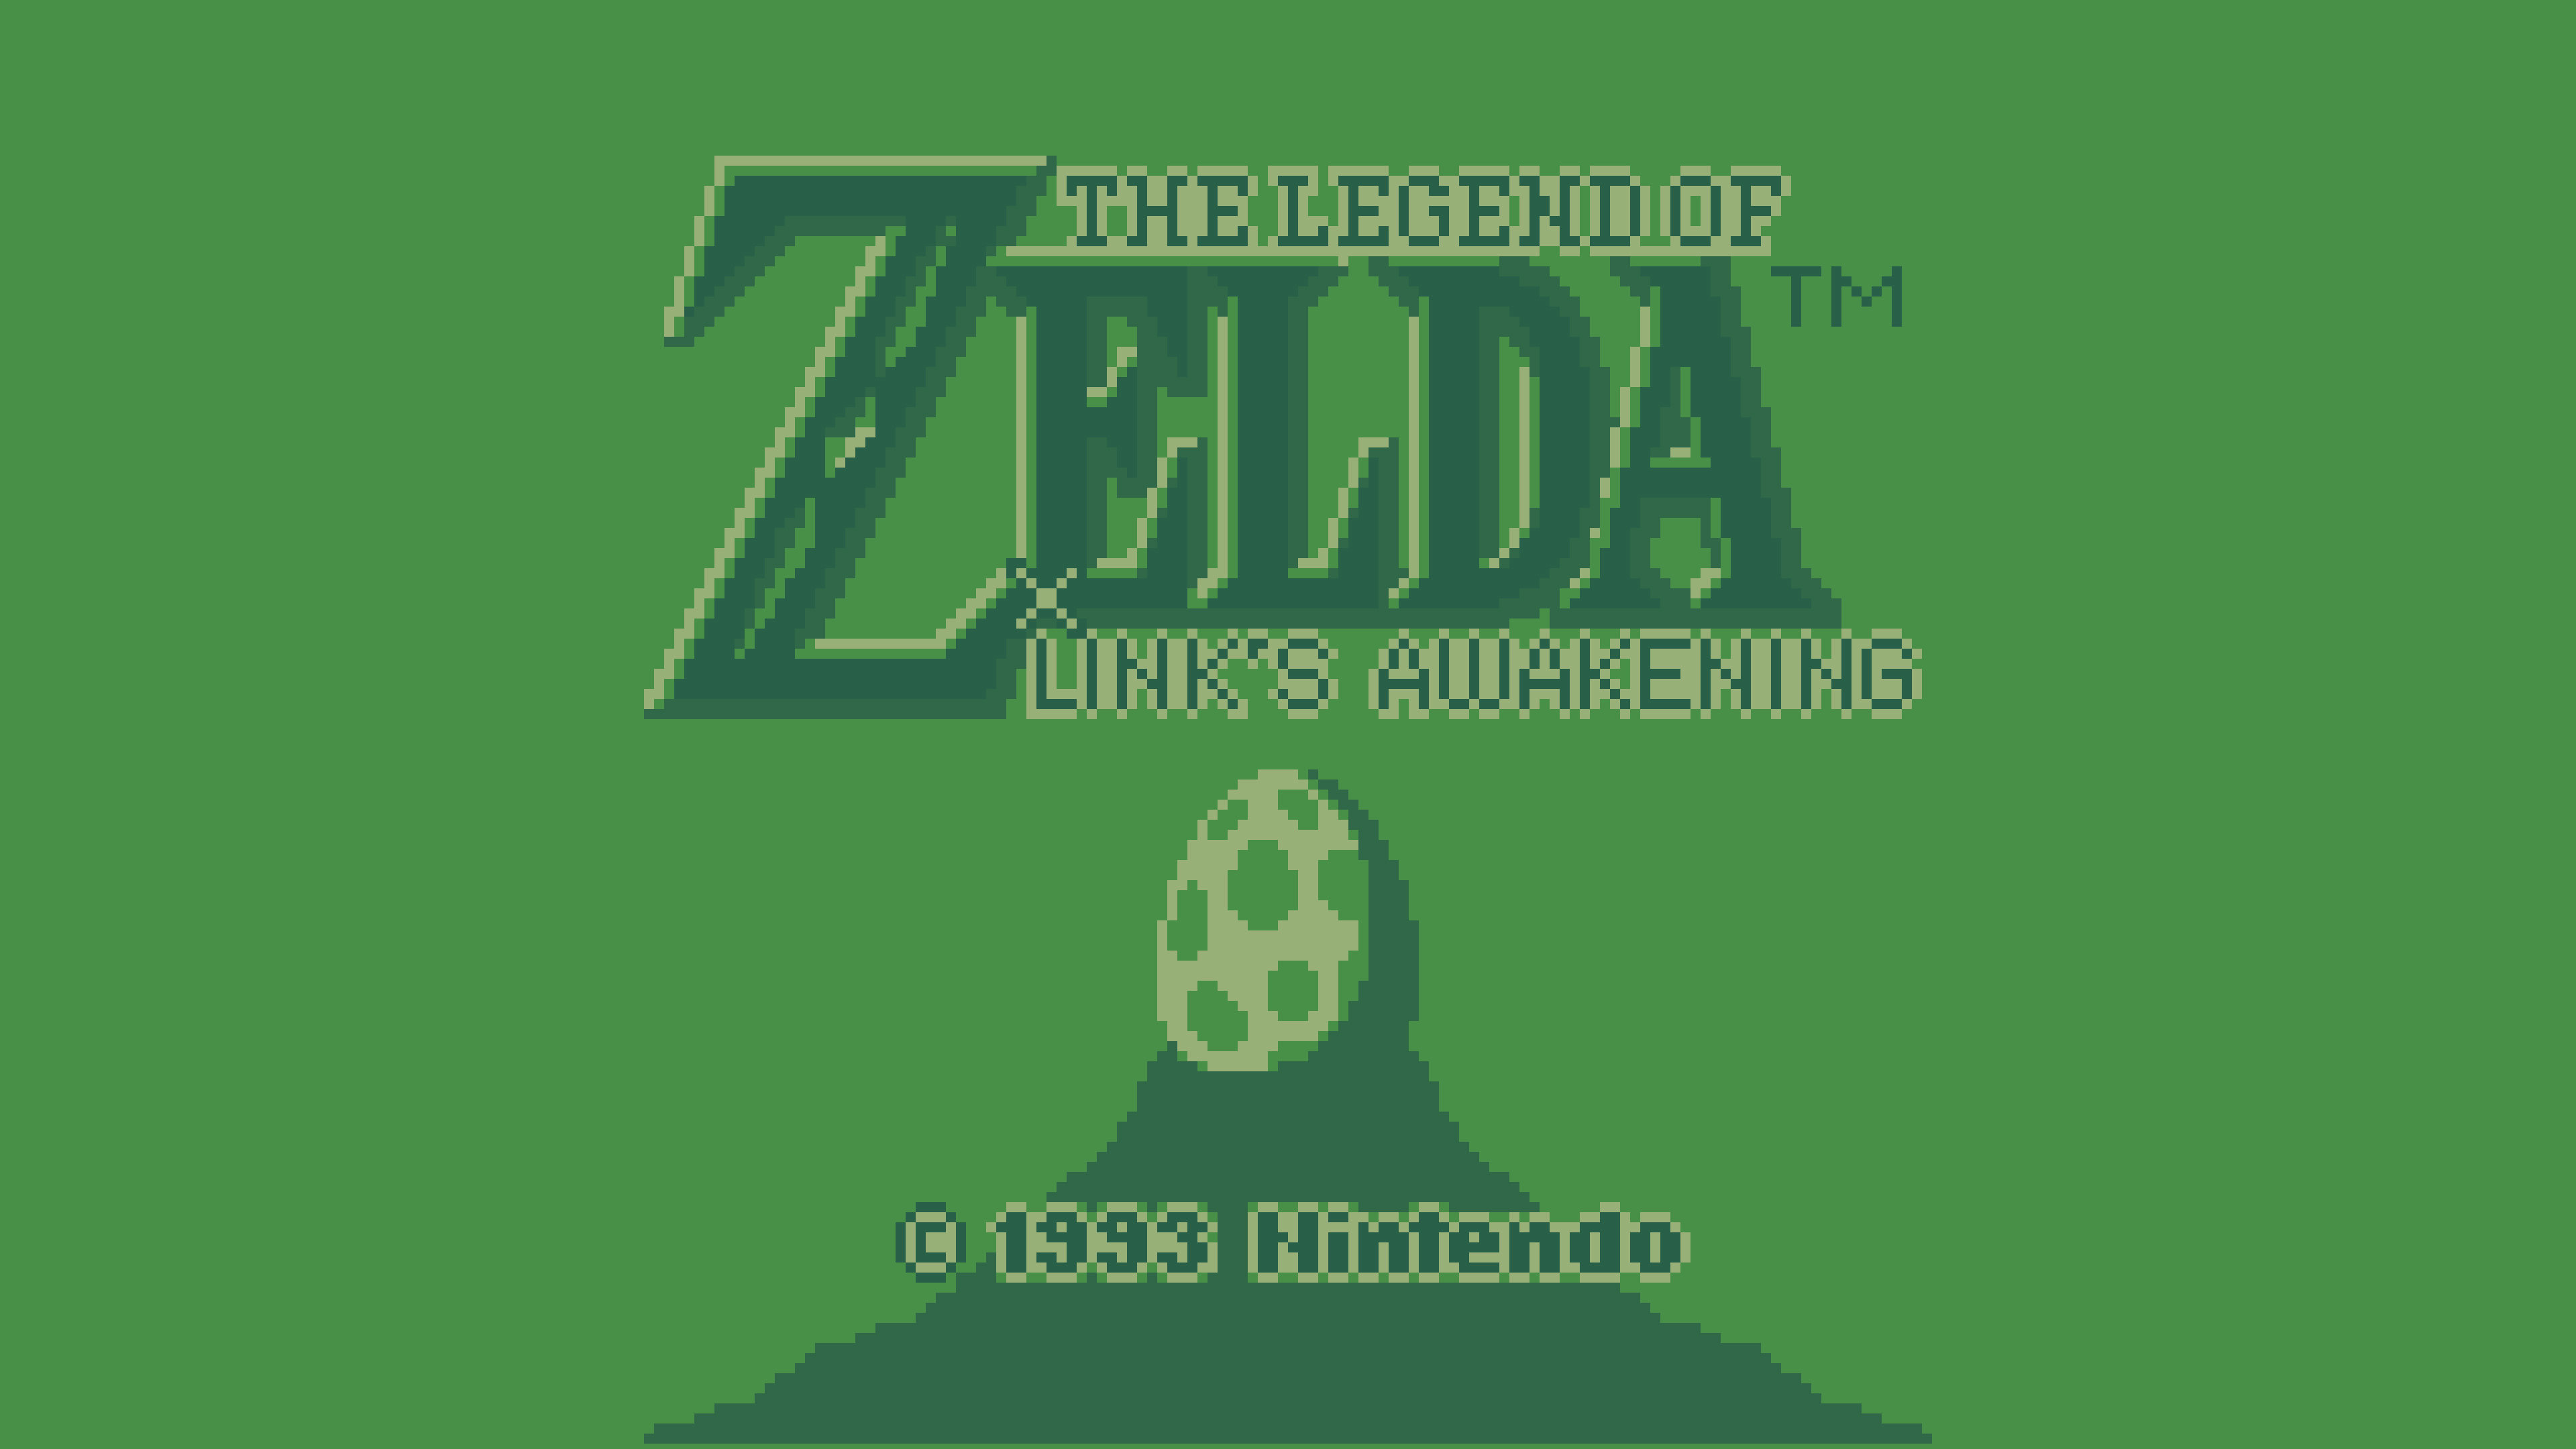 Awesome The Legend Of Zelda: Link's Awakening free wallpaper ID:20598 for ultra hd 4k computer